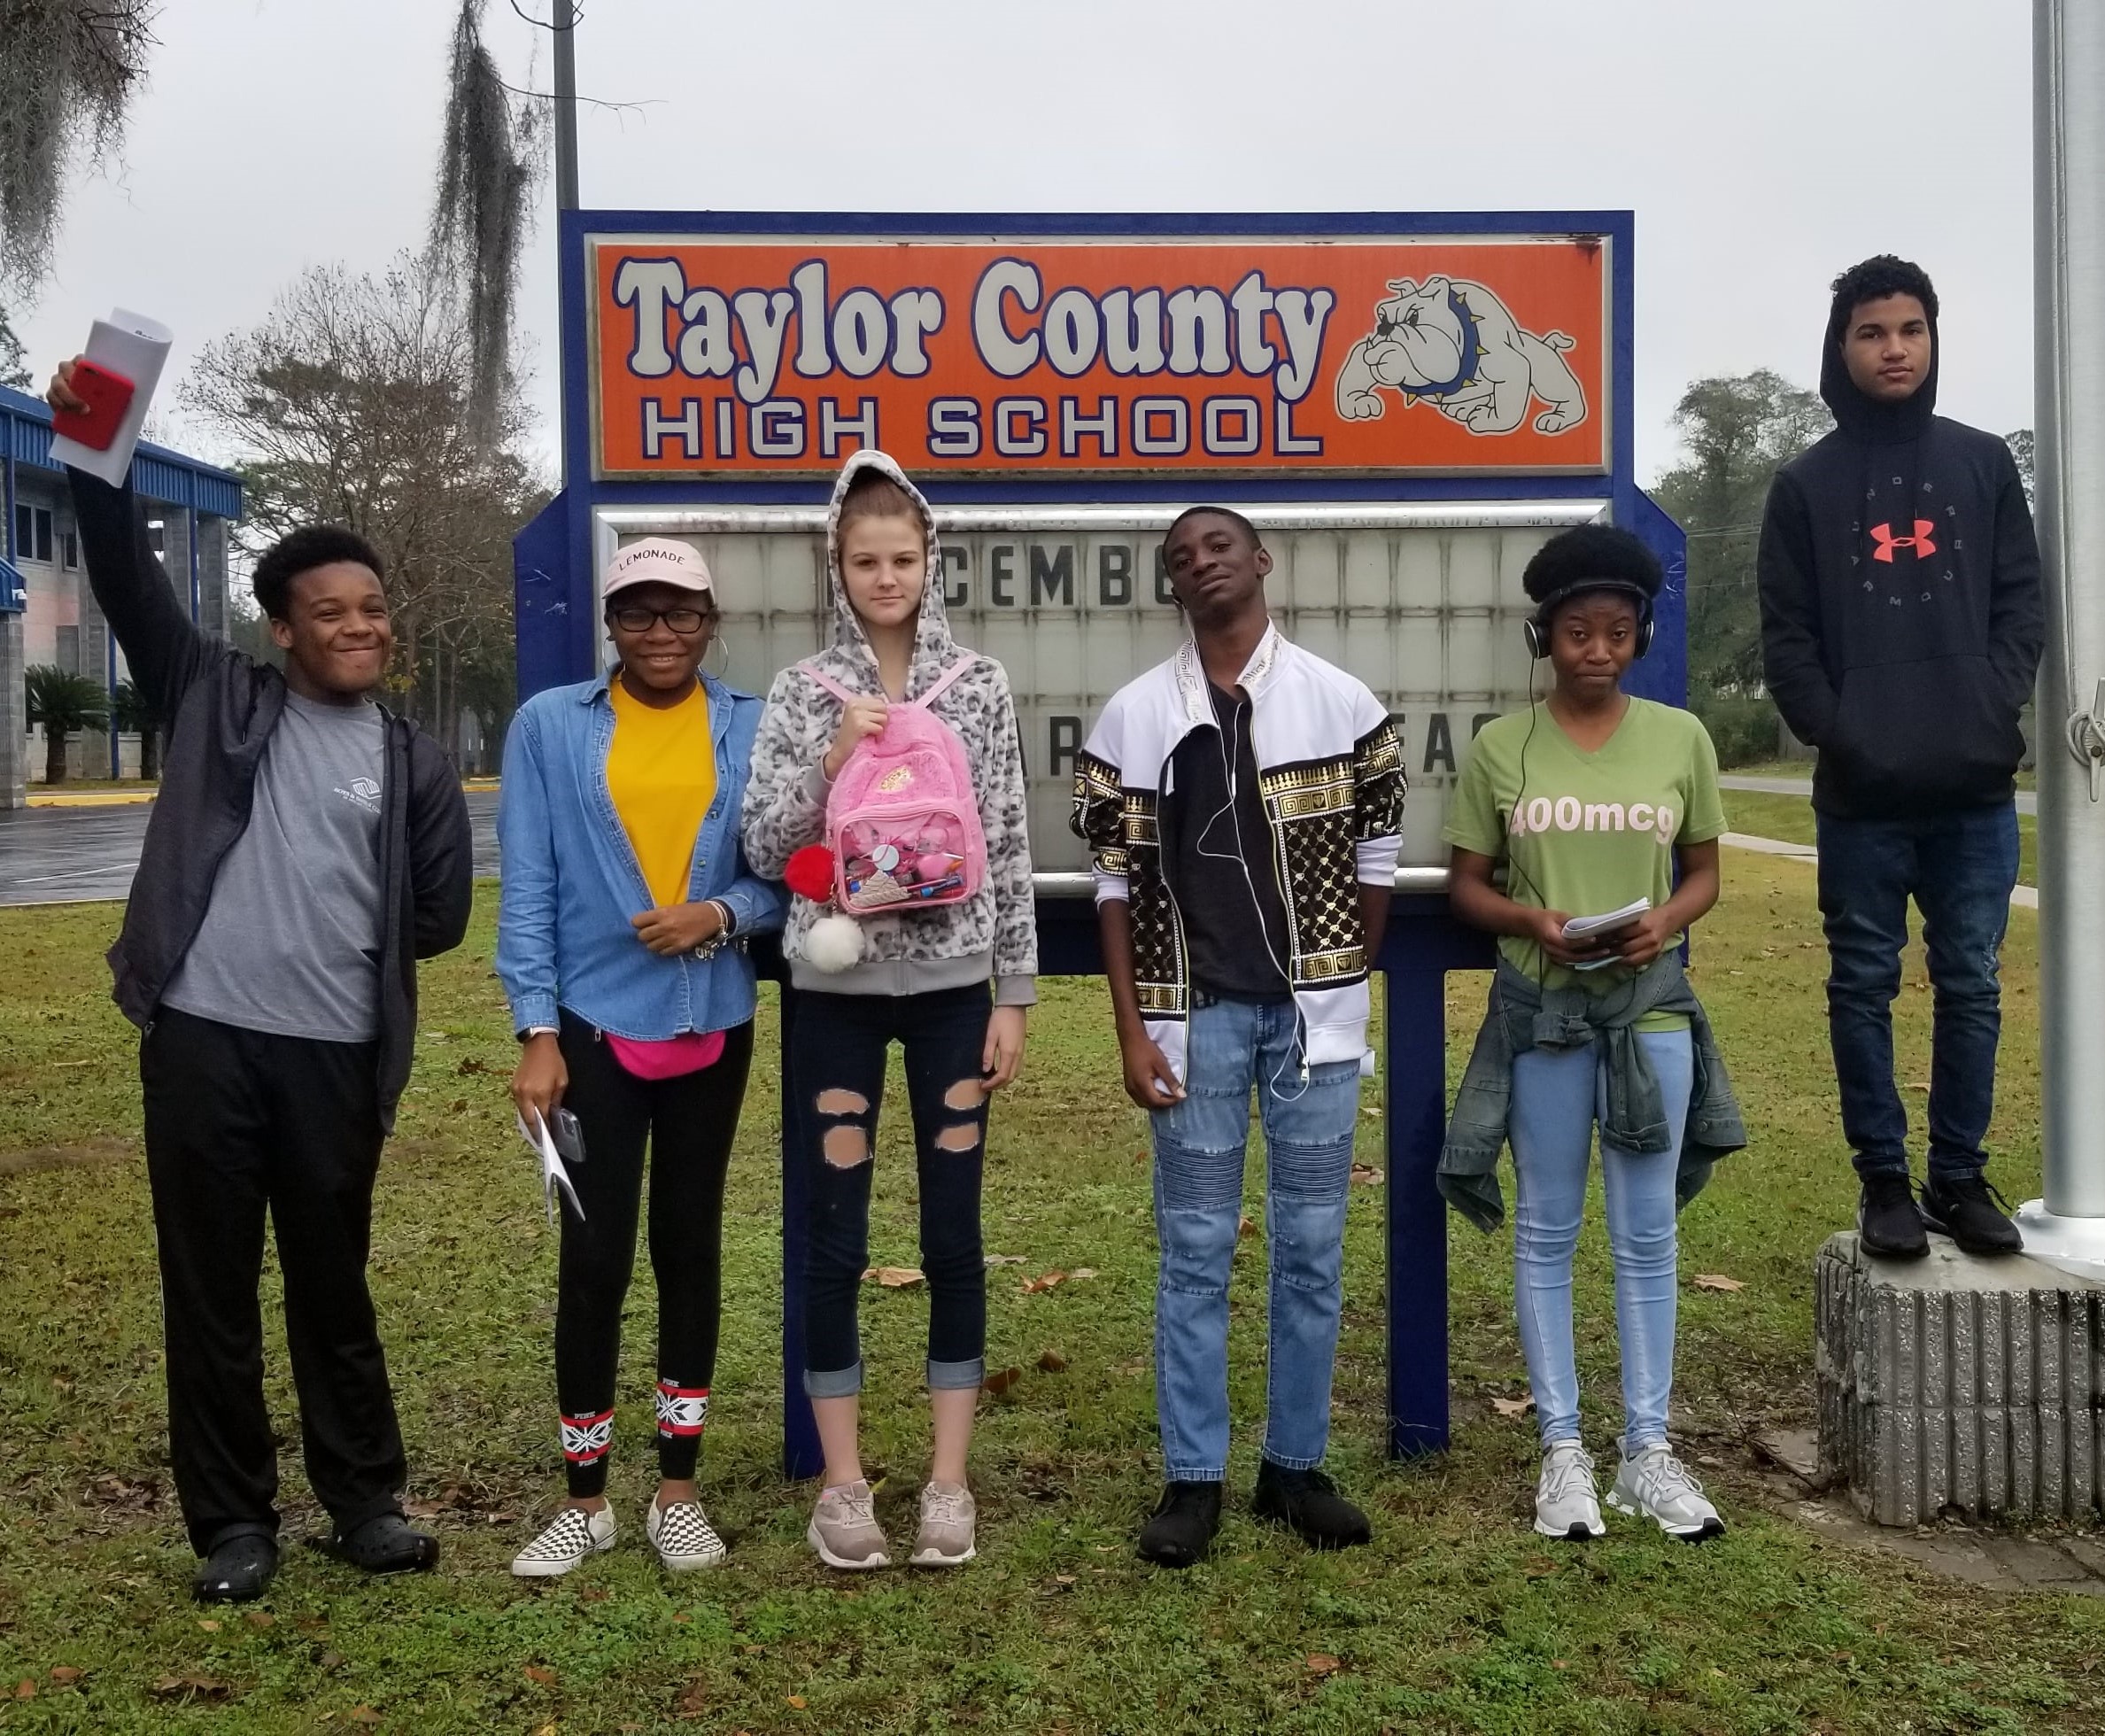 Group of young people standing in front of Taylor County High School sign